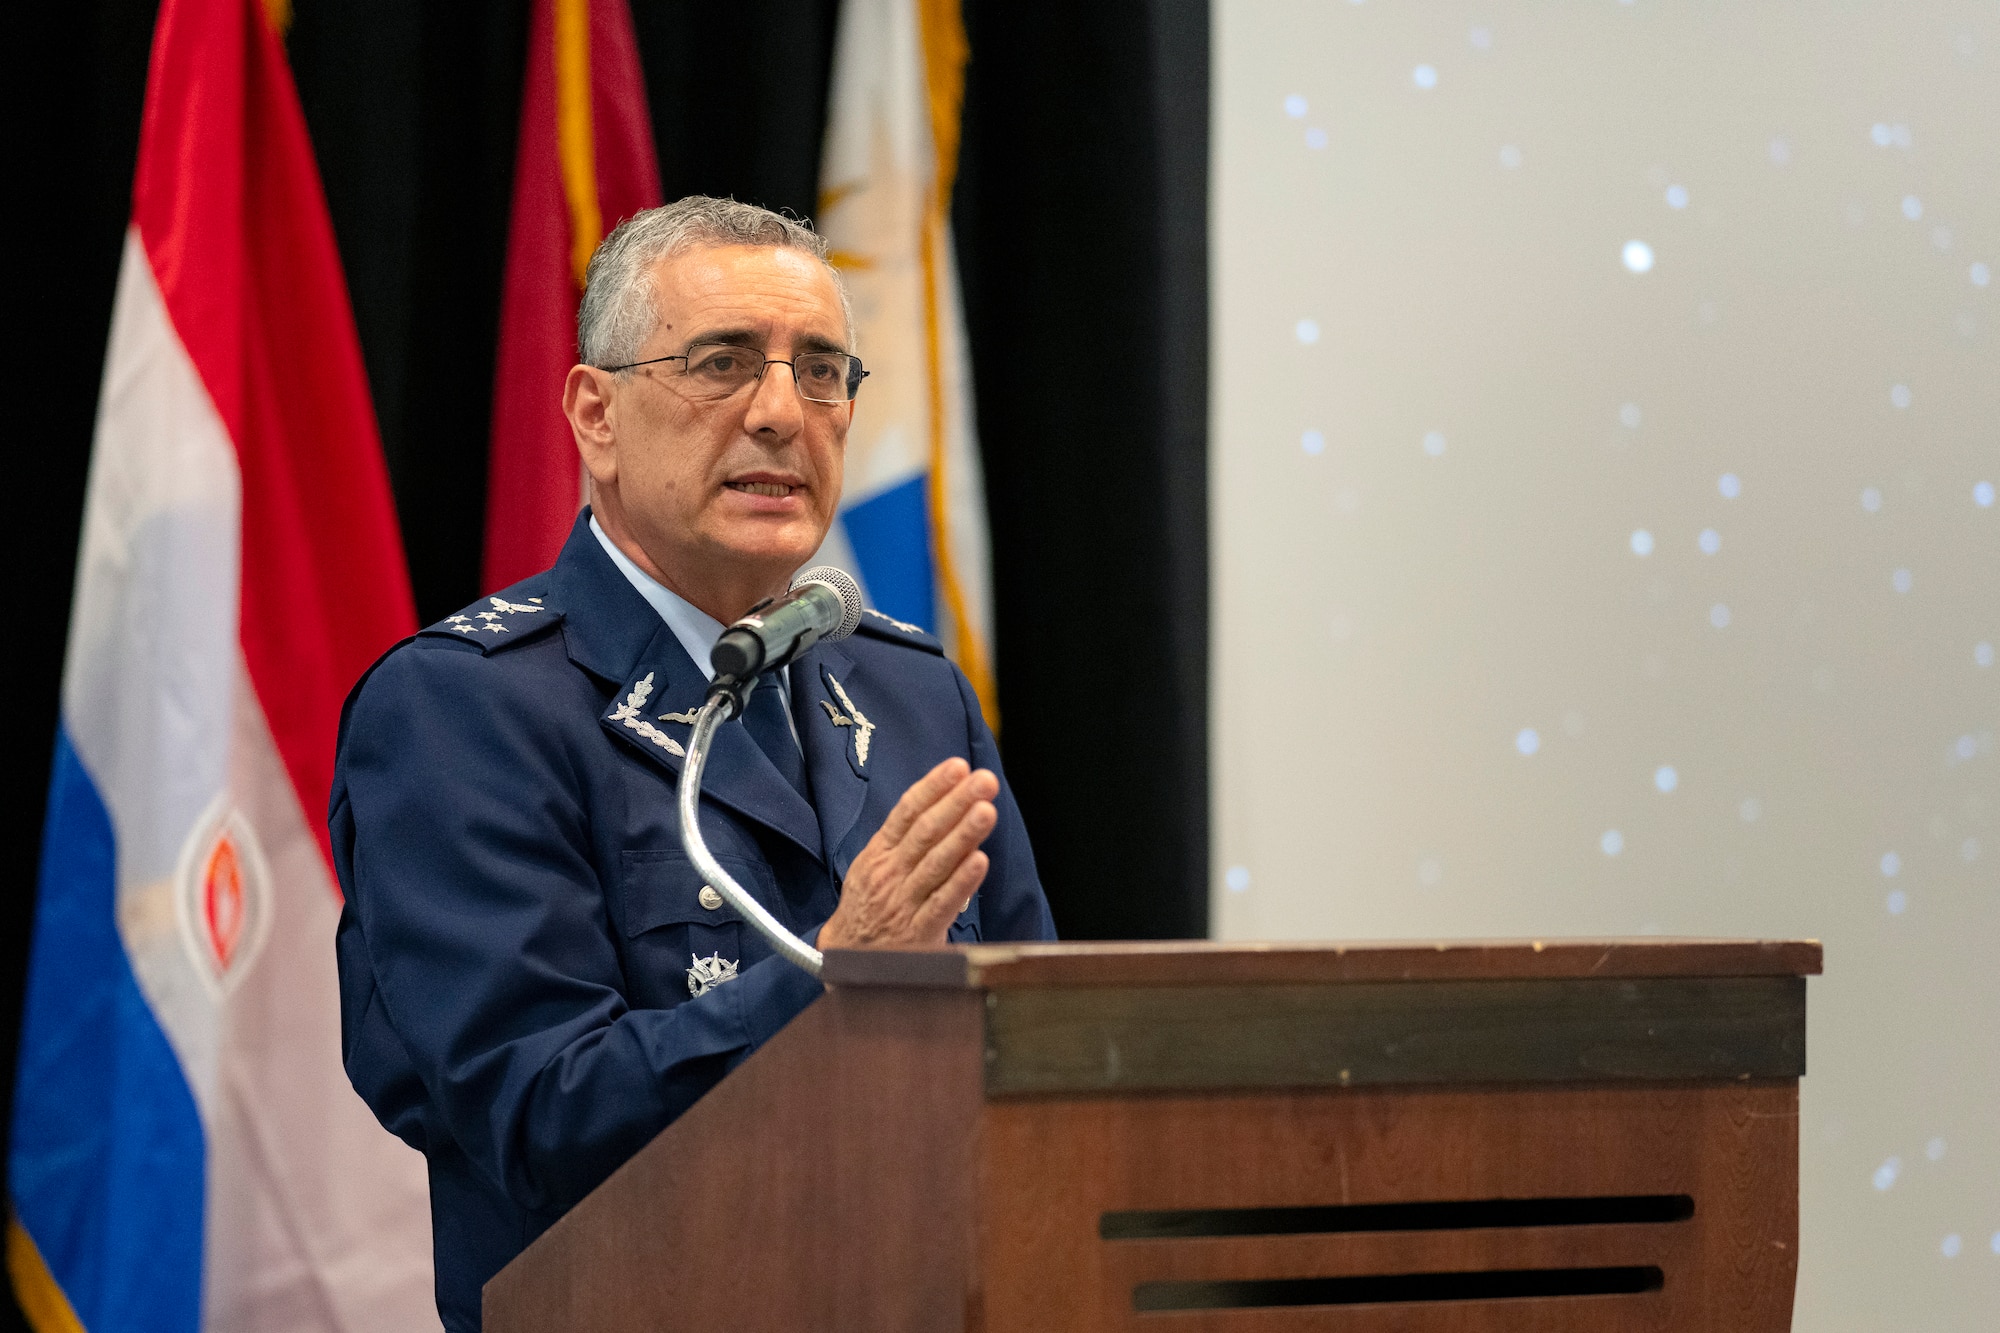 Chilean air chief Gen. Hugo Eduardo Rodríguez González gives a briefing on the Chilean Space Program during the South American Air Chiefs Conference in Tucson, Ariz. Dec. 5, 2023.